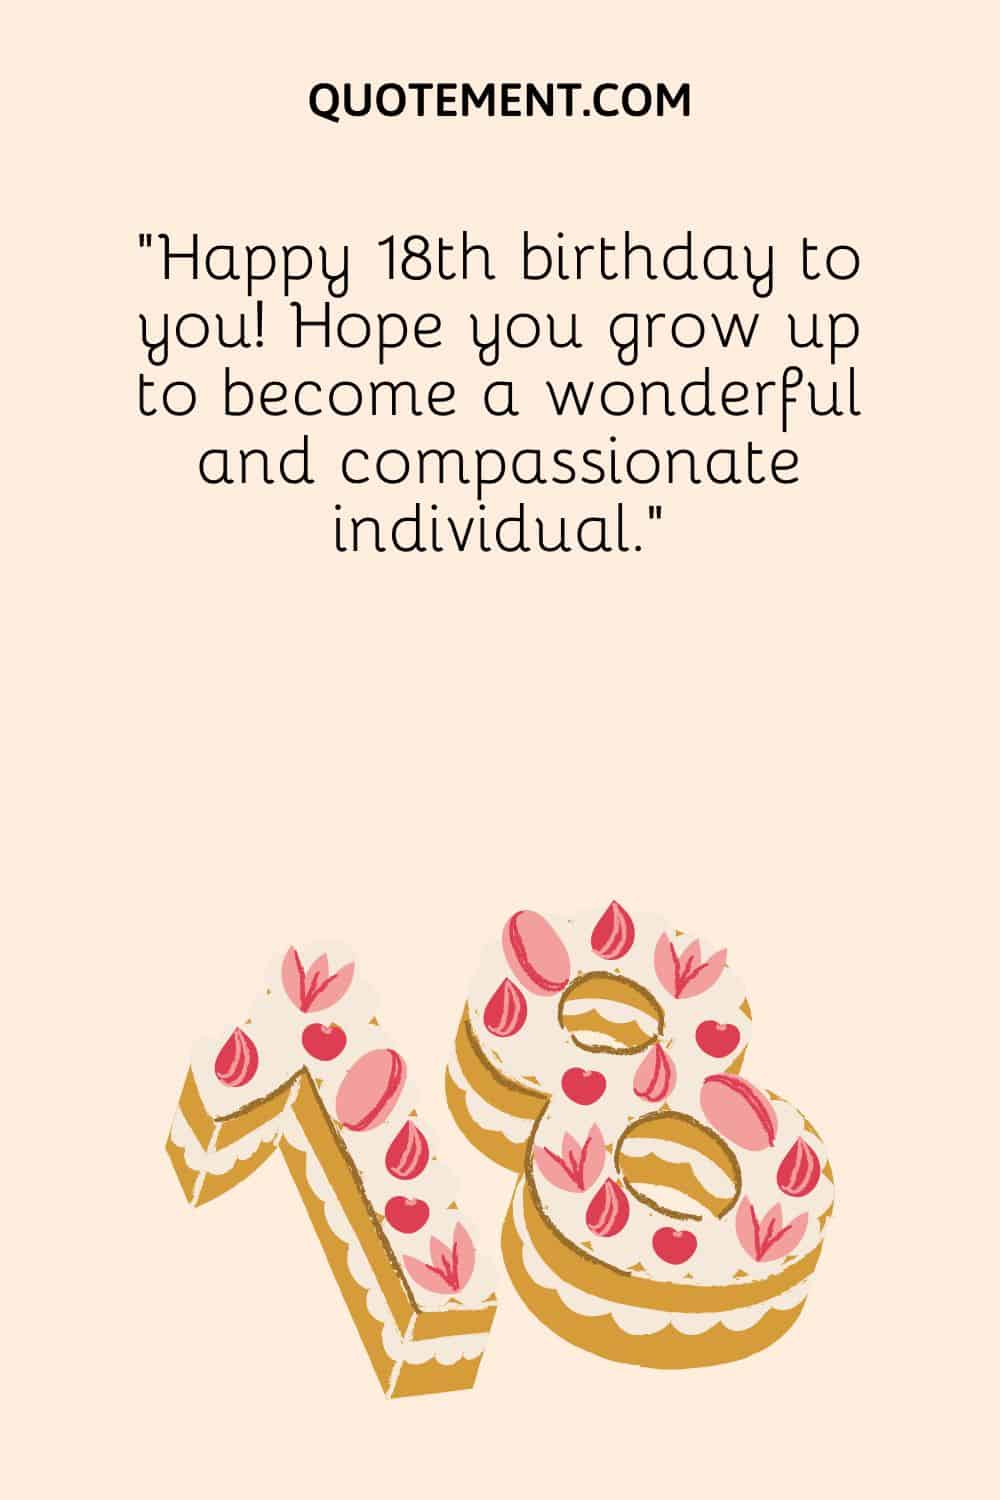 Hope you grow up to become a wonderful and compassionate individual.